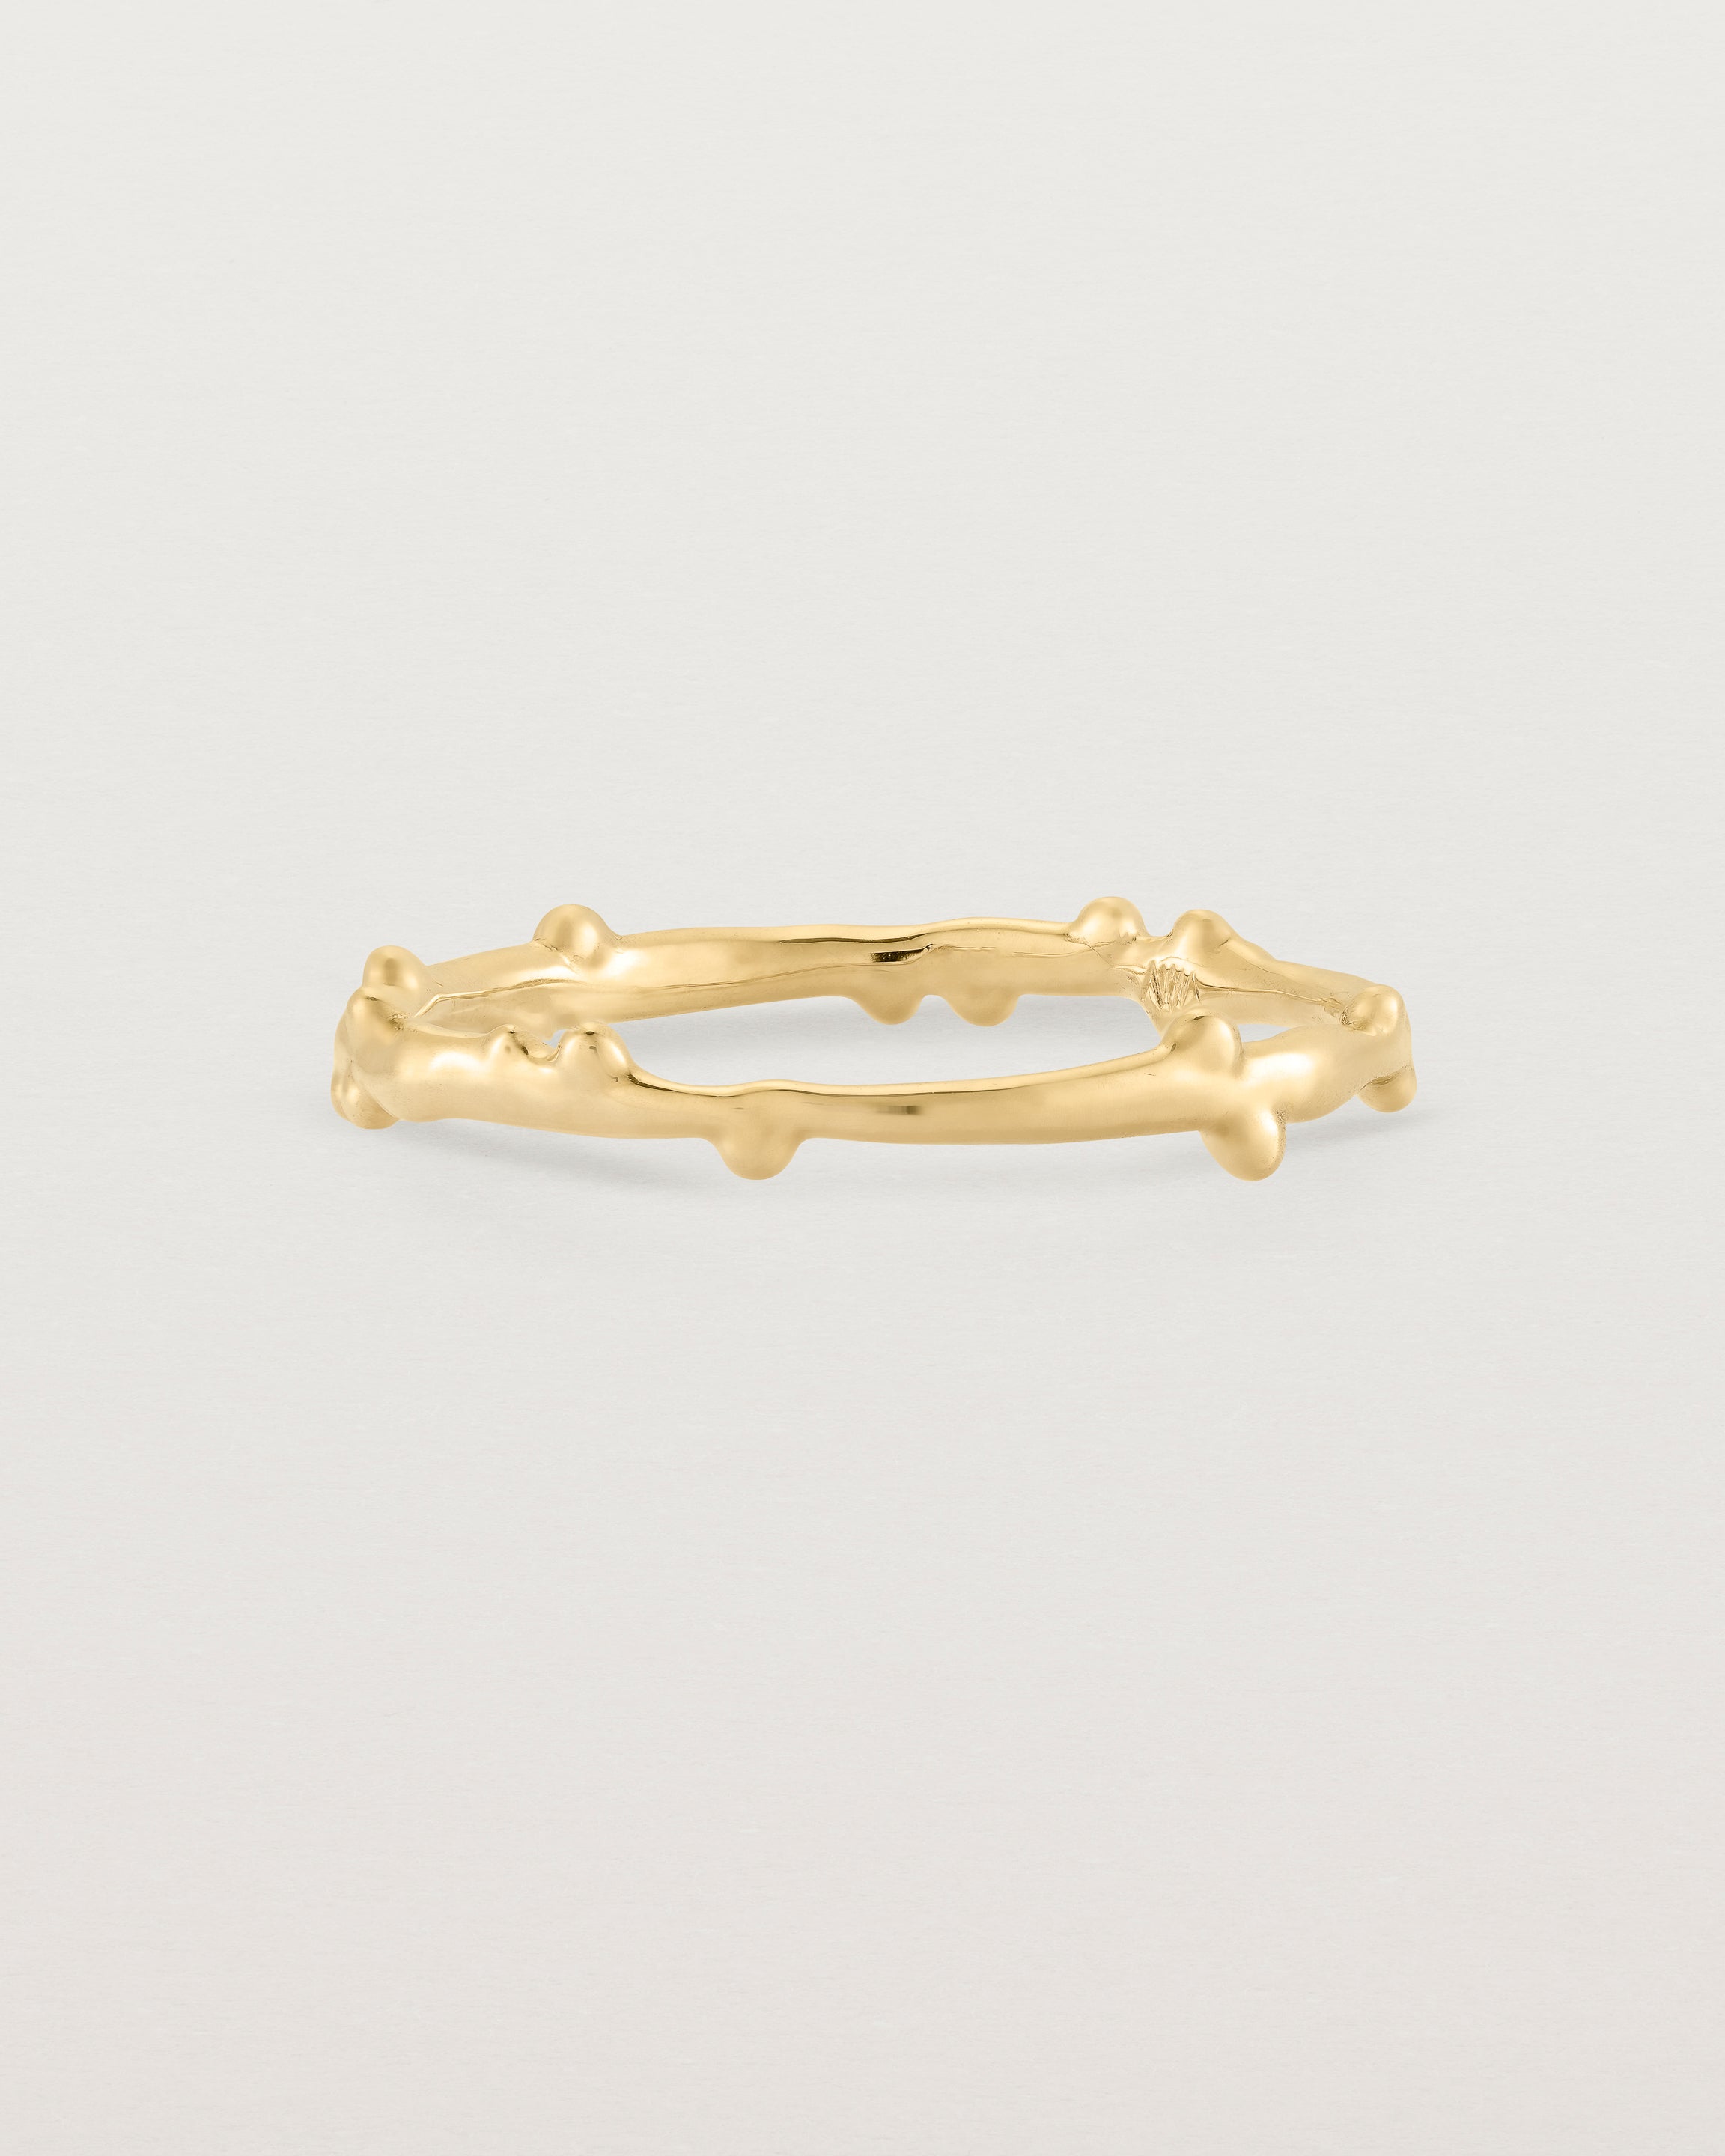 The Dotted Organic Stacking Ring in Yellow Gold.